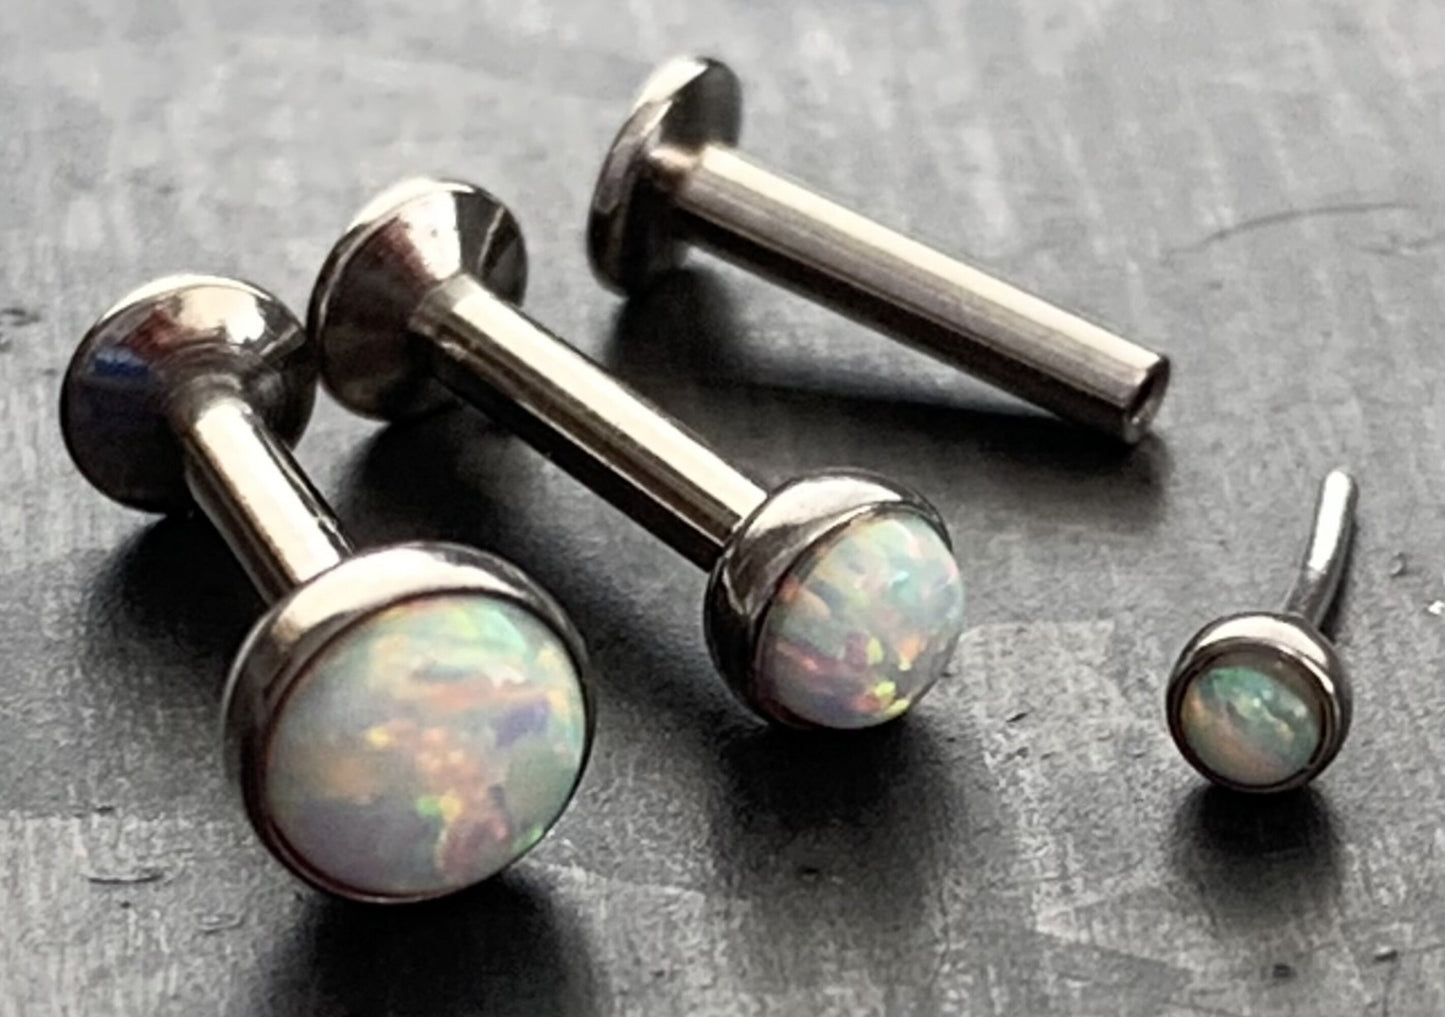 1 Piece Unique Push In Opal Dome Labret Monroe Stud Lip Ring- 16g - Length: 6mm or 8mm - Gem Size 2, 3 or 4mm - White or Blue Available!